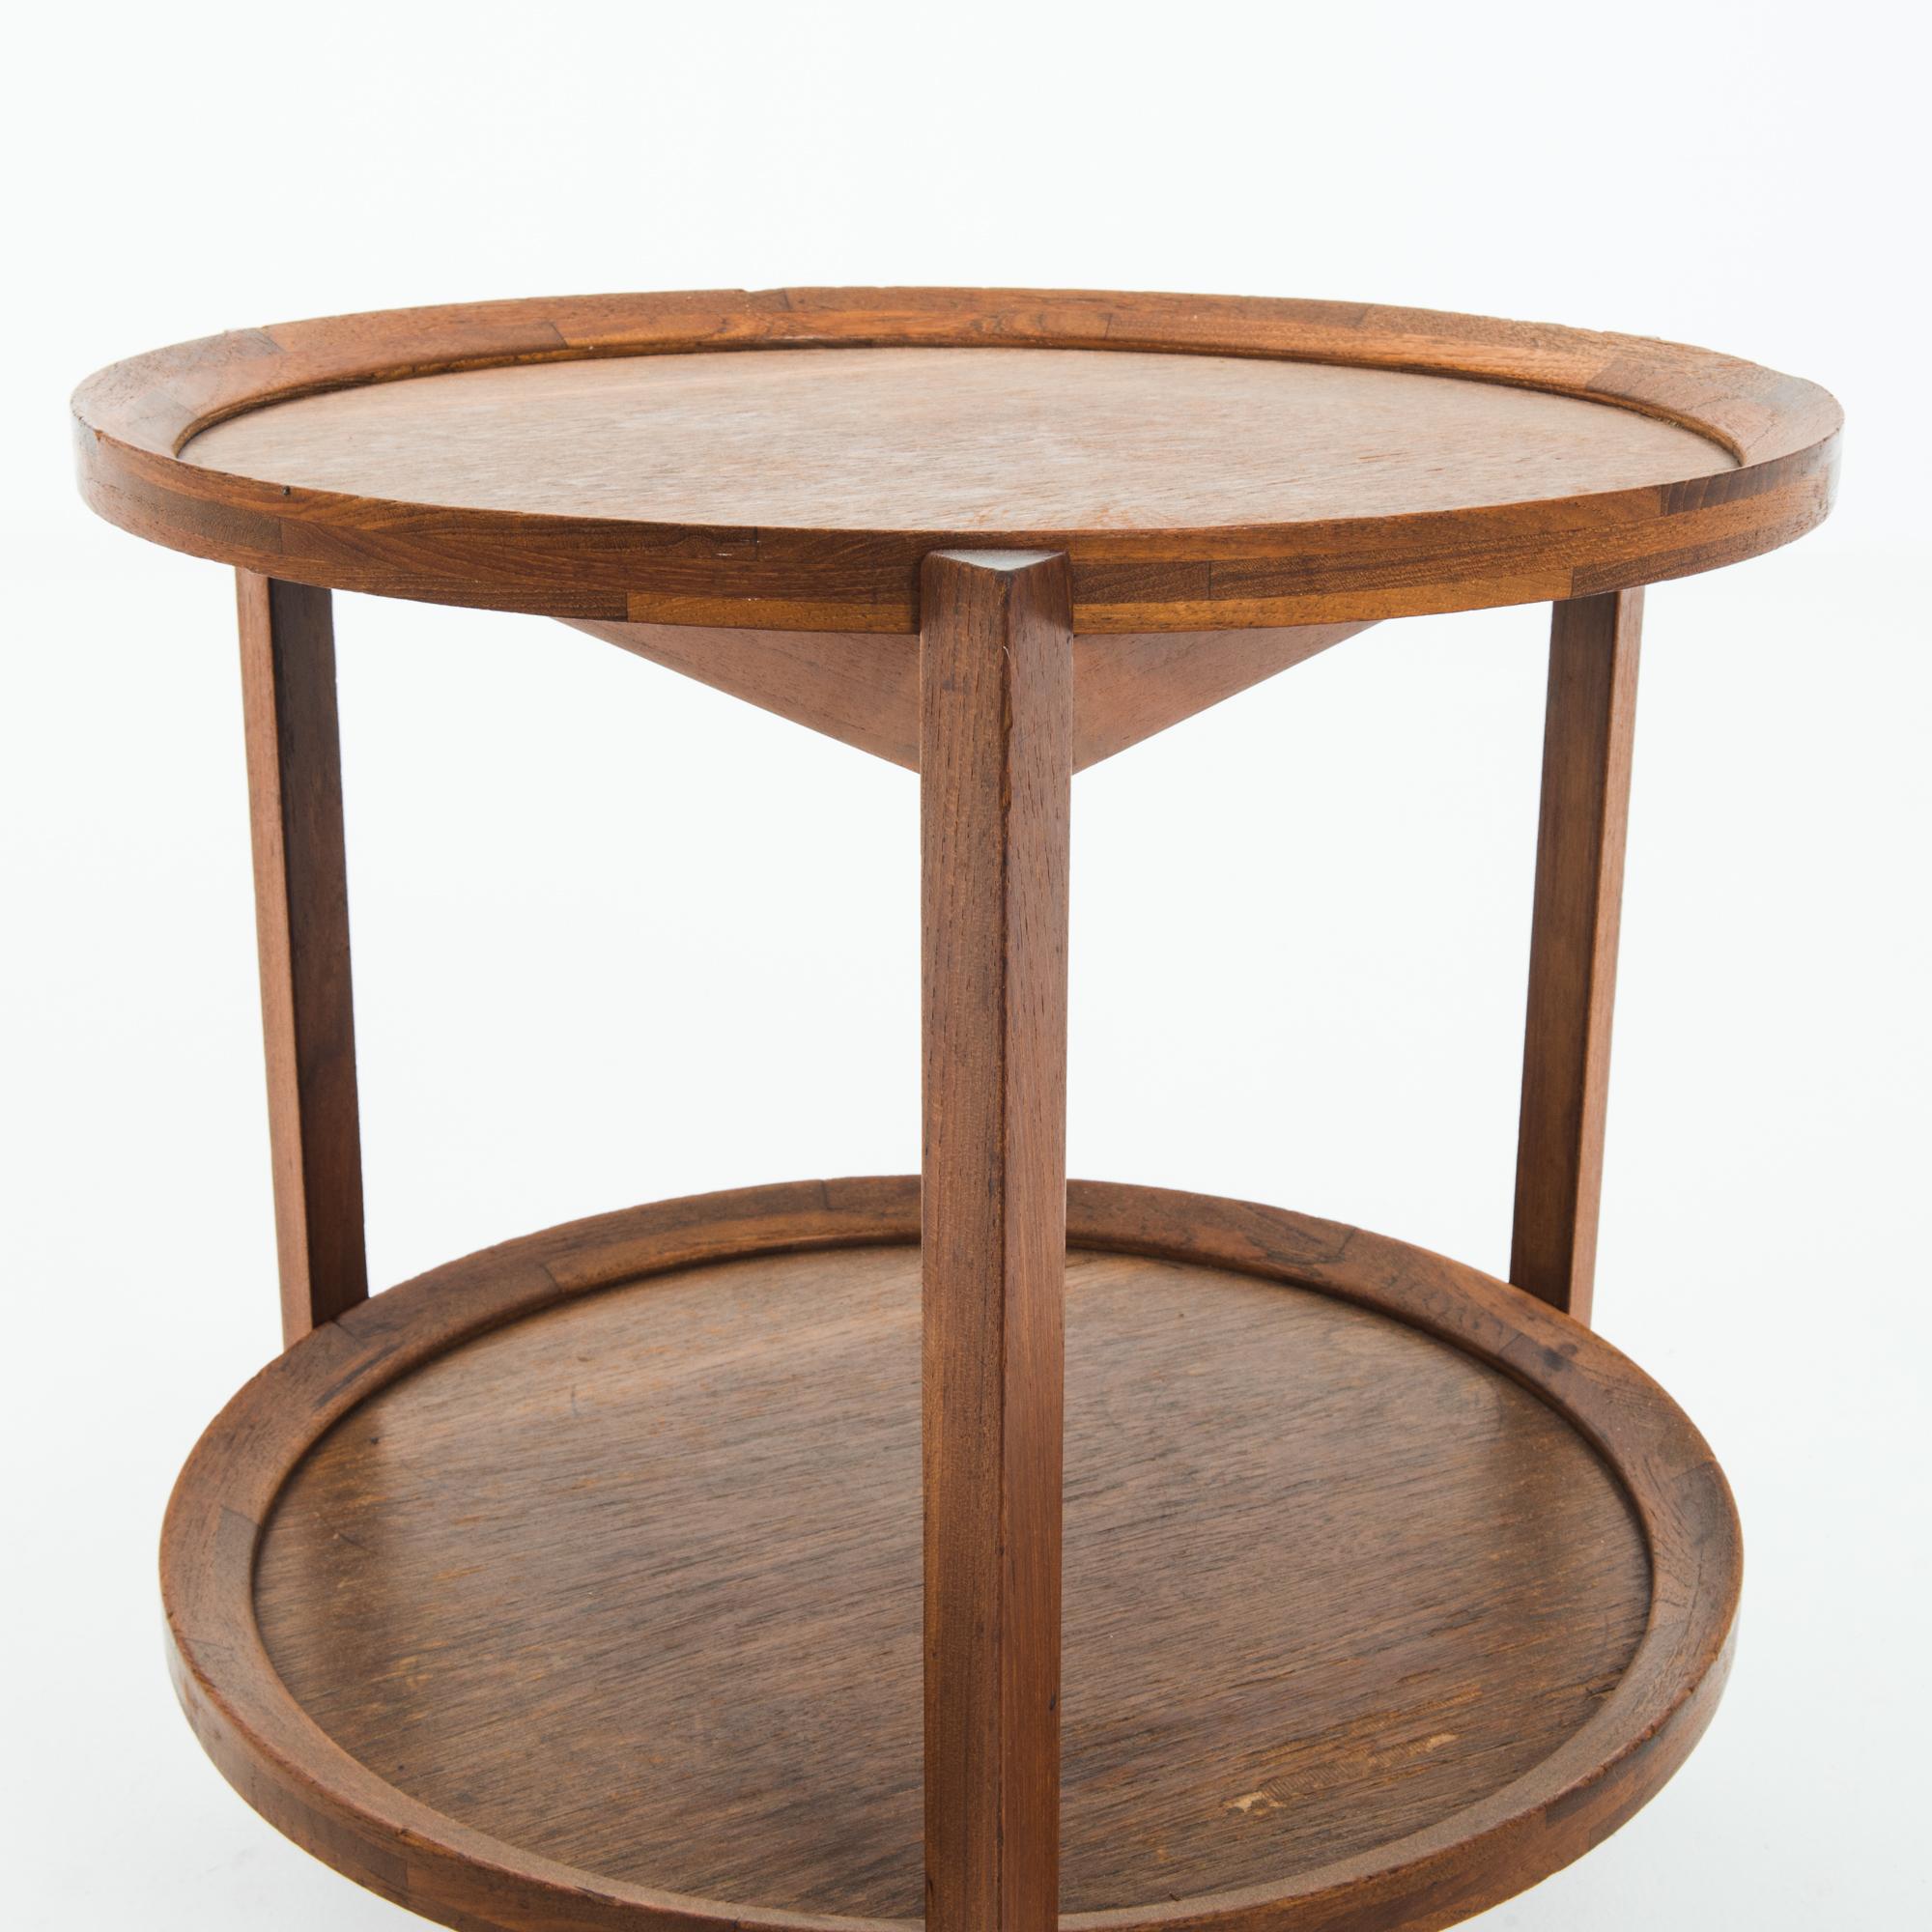 This wooden bar cart was made in Denmark, circa 1960. It features an elegant construction of geometric forms, reflecting the clean lines of Danish Modern design. The two circular tiers are accompanied by an oblique raised edge, and three triangular